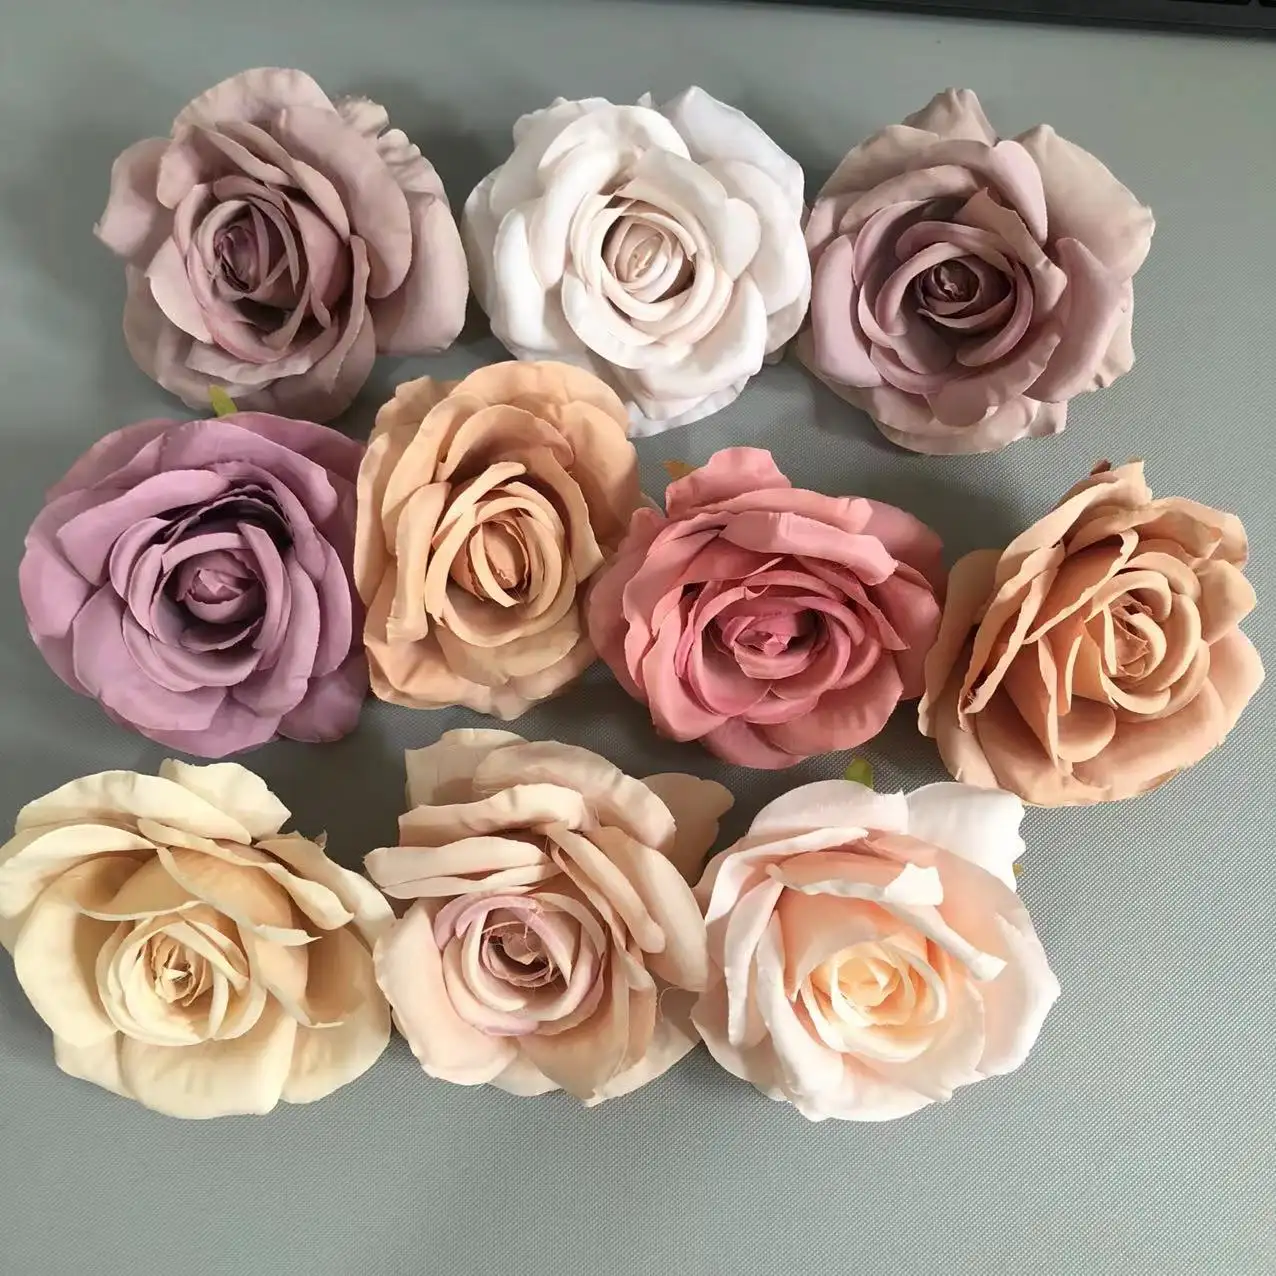 IFG wholesale silk artificial flowers colours brown toffee rose beige quicksand golden rose head flower